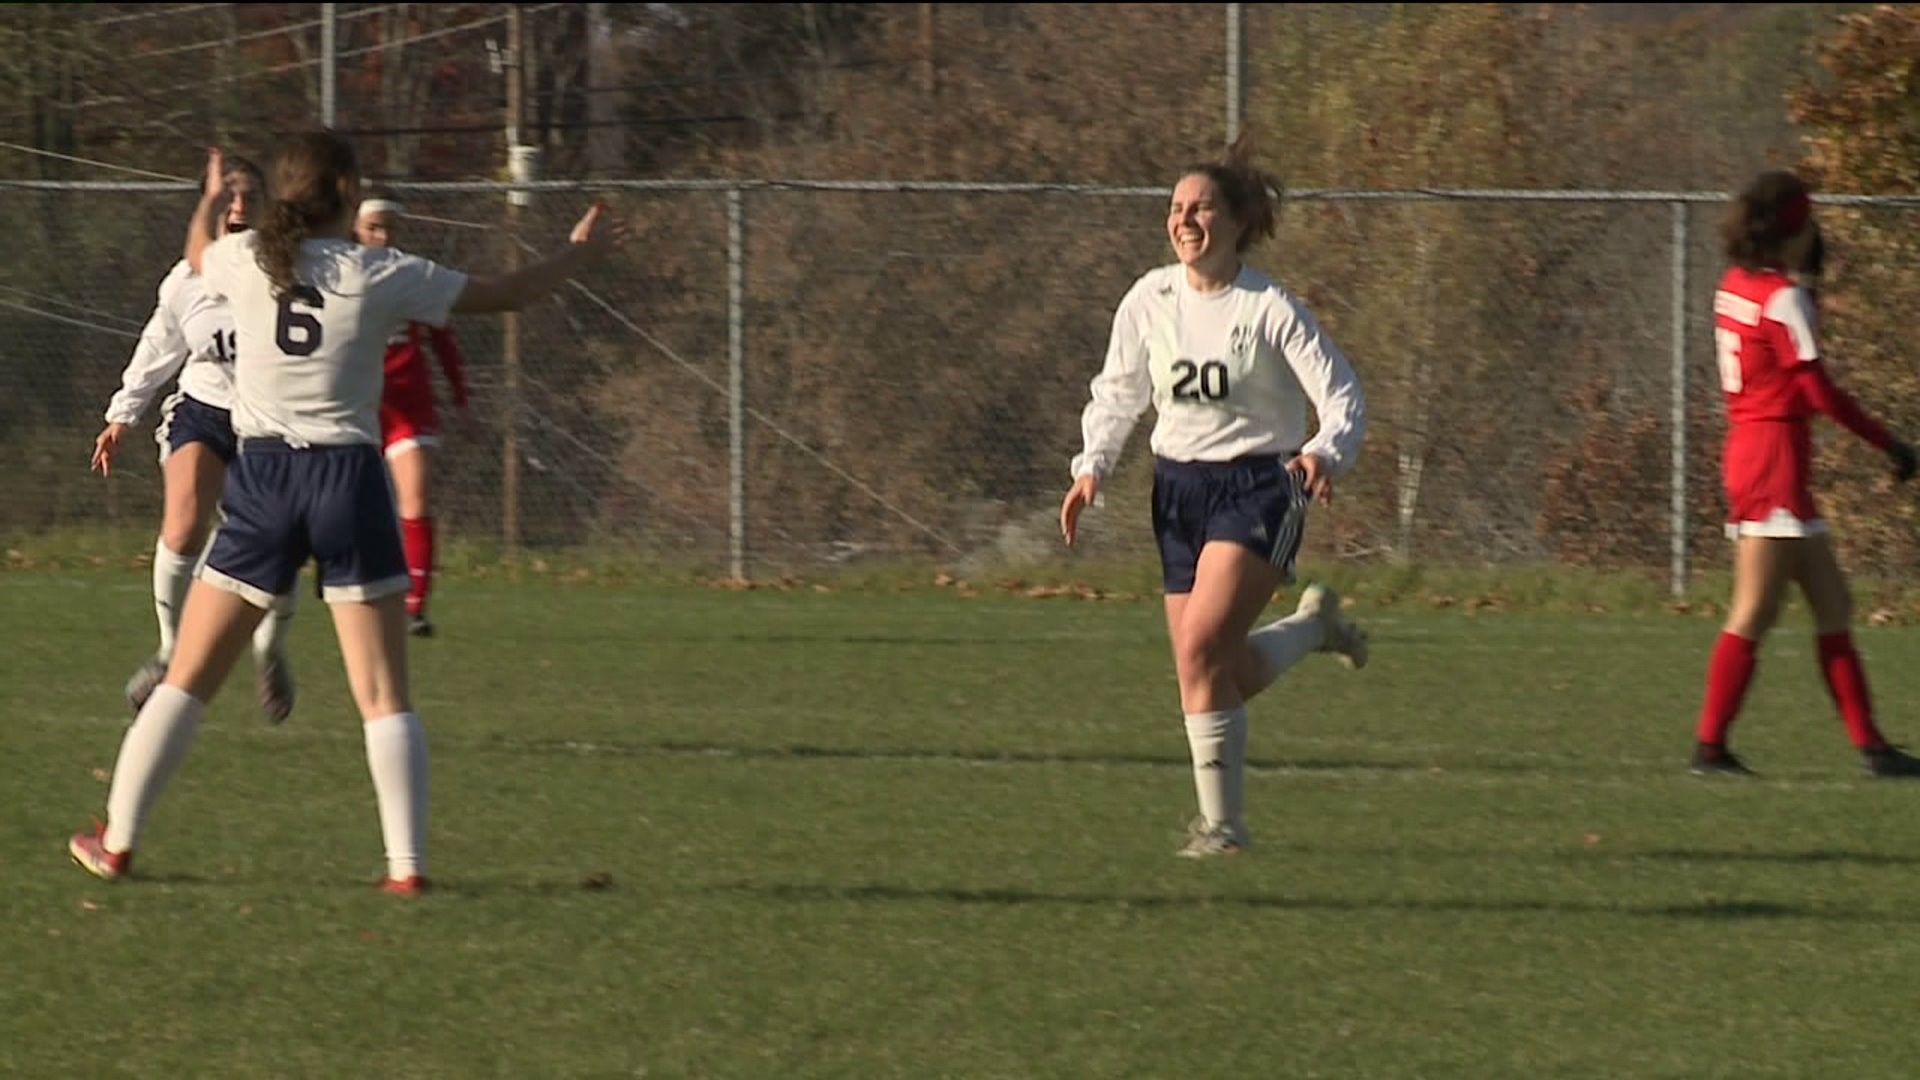 Abington Heights Advances to Girls Soccer District Title Game